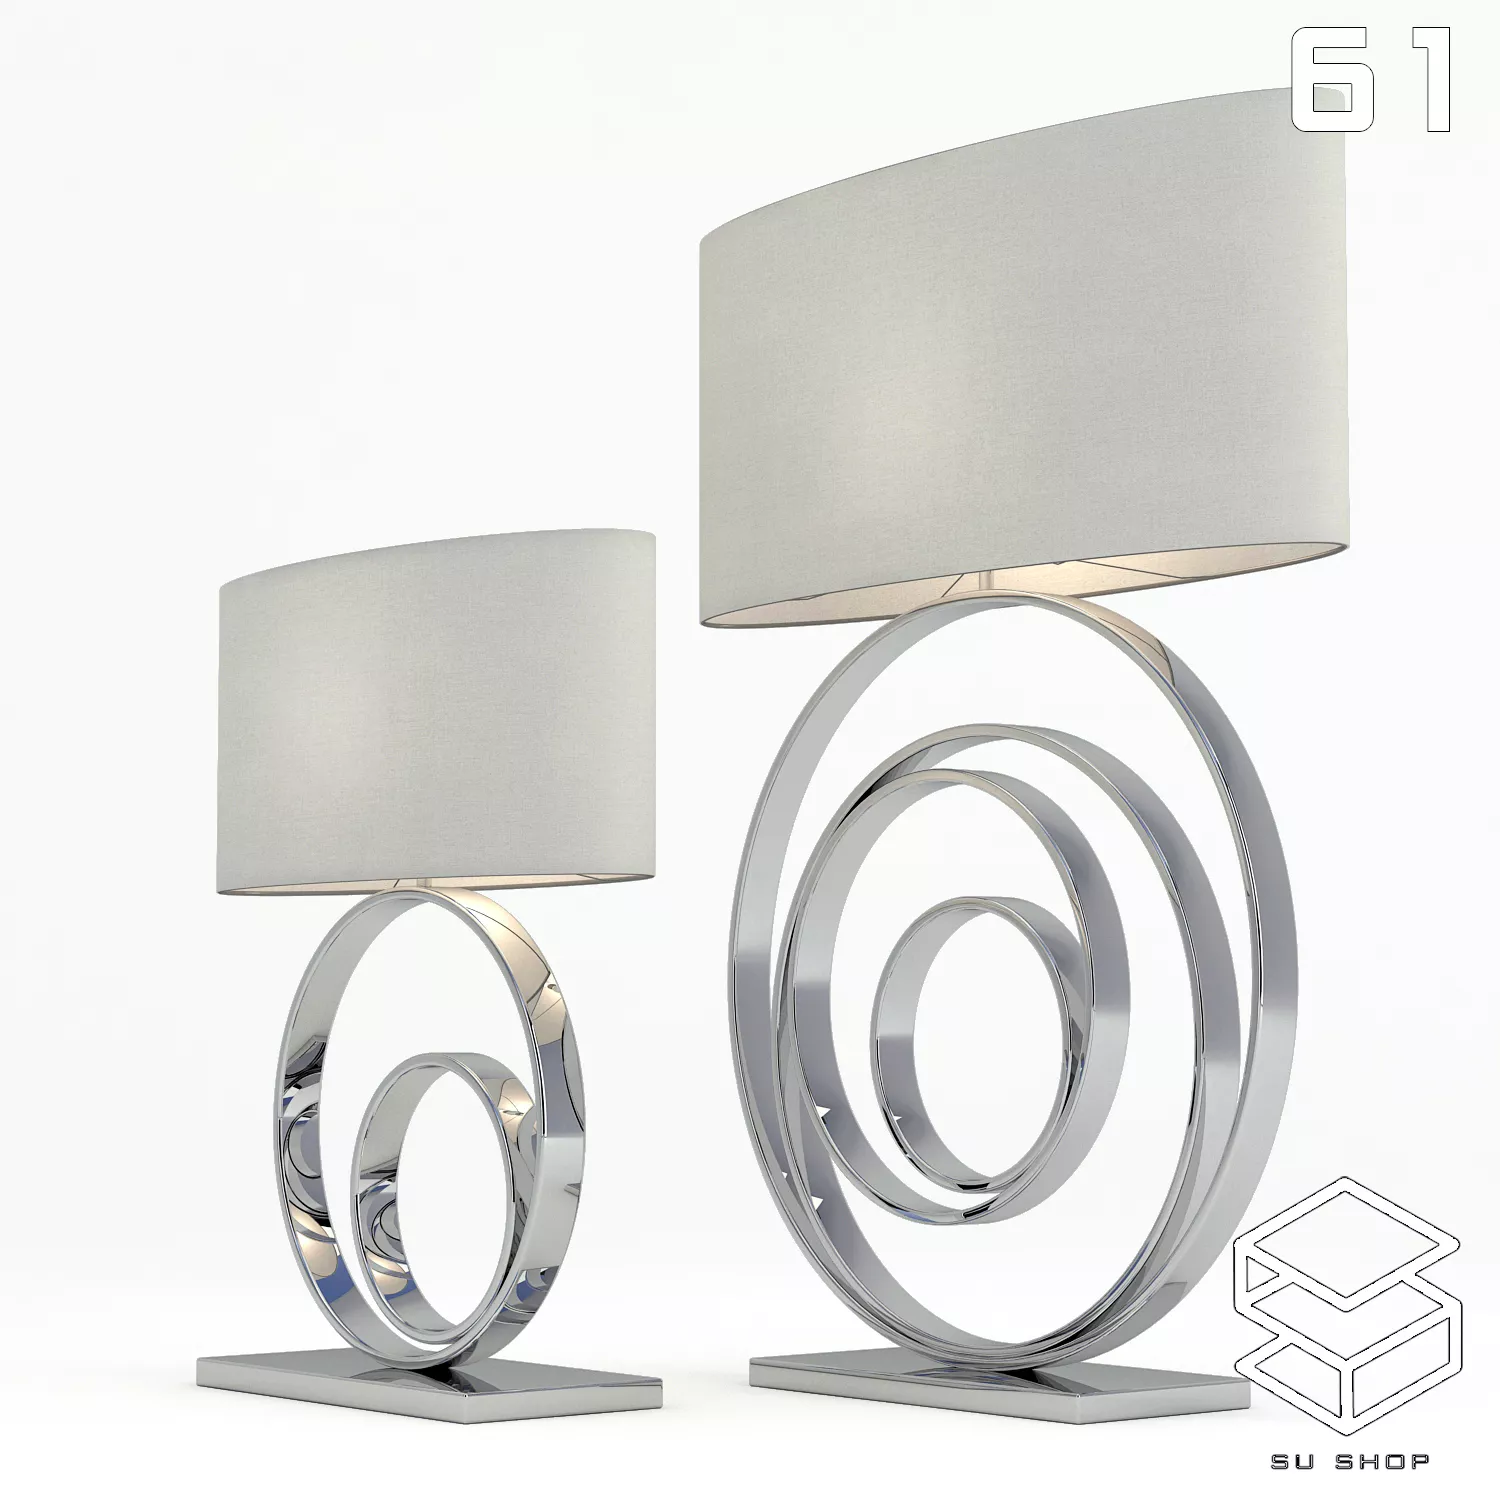 MODERN TABLE LAMP - SKETCHUP 3D MODEL - VRAY OR ENSCAPE - ID14857